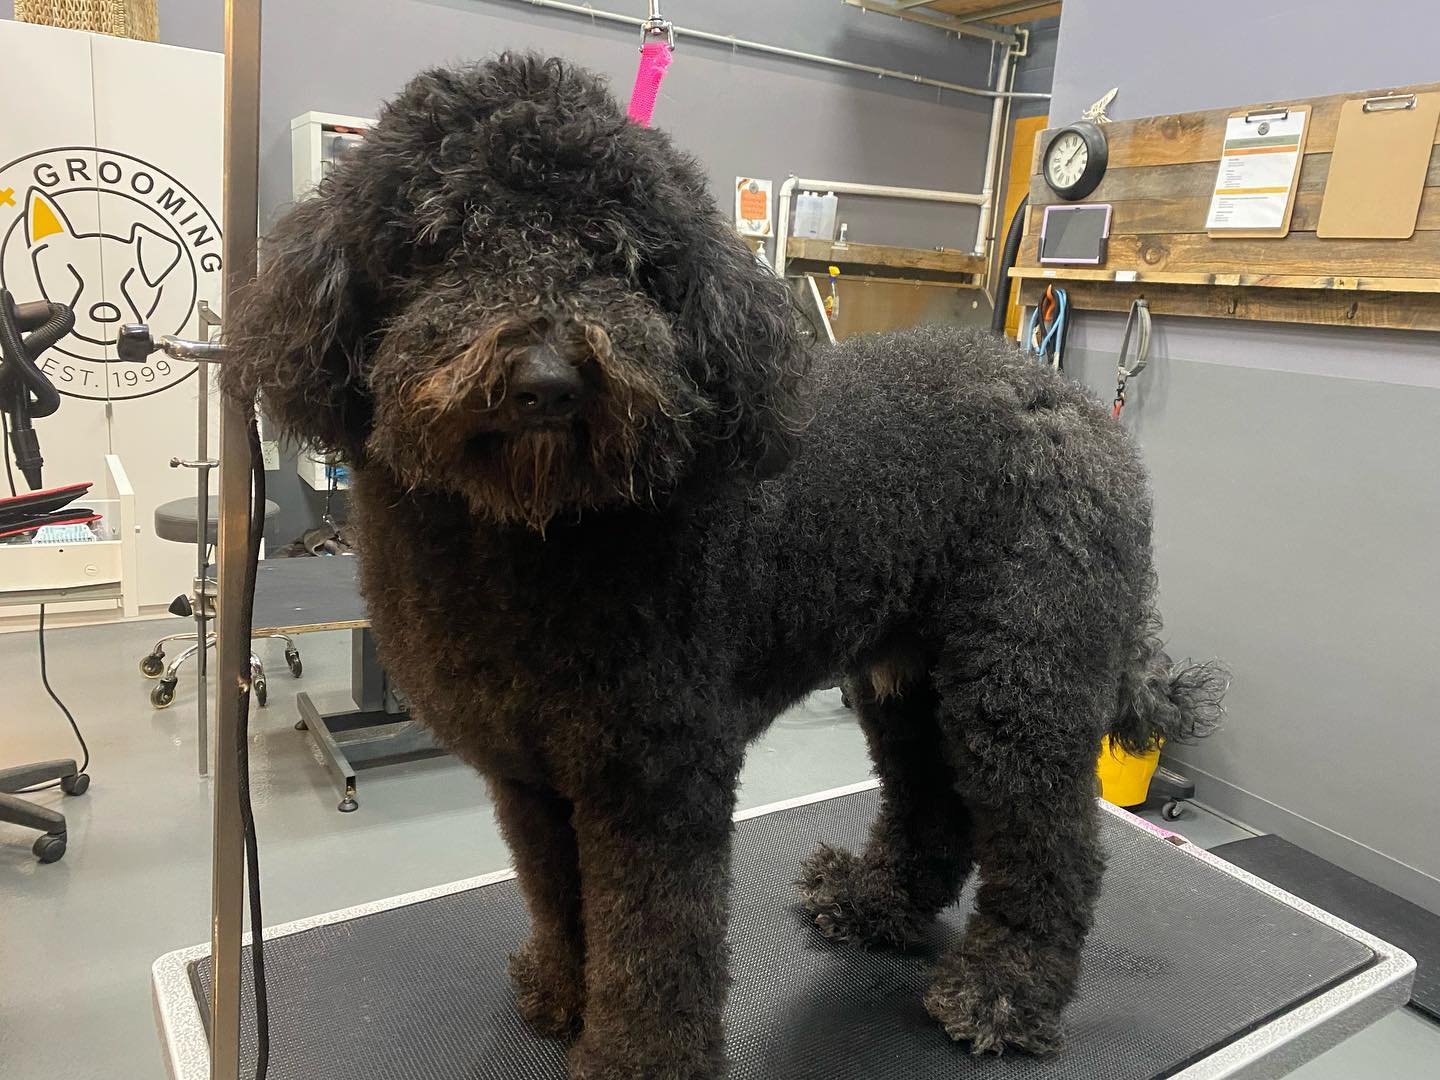 Before and after!! It&rsquo;s getting WARM out there- help keep your pup comfortable and book a grooming appointment today! We still have some haircut appointments available for next week 🐩✂️🛁

#doggrooming #doggroomer #warmweather #doghaircut #sum